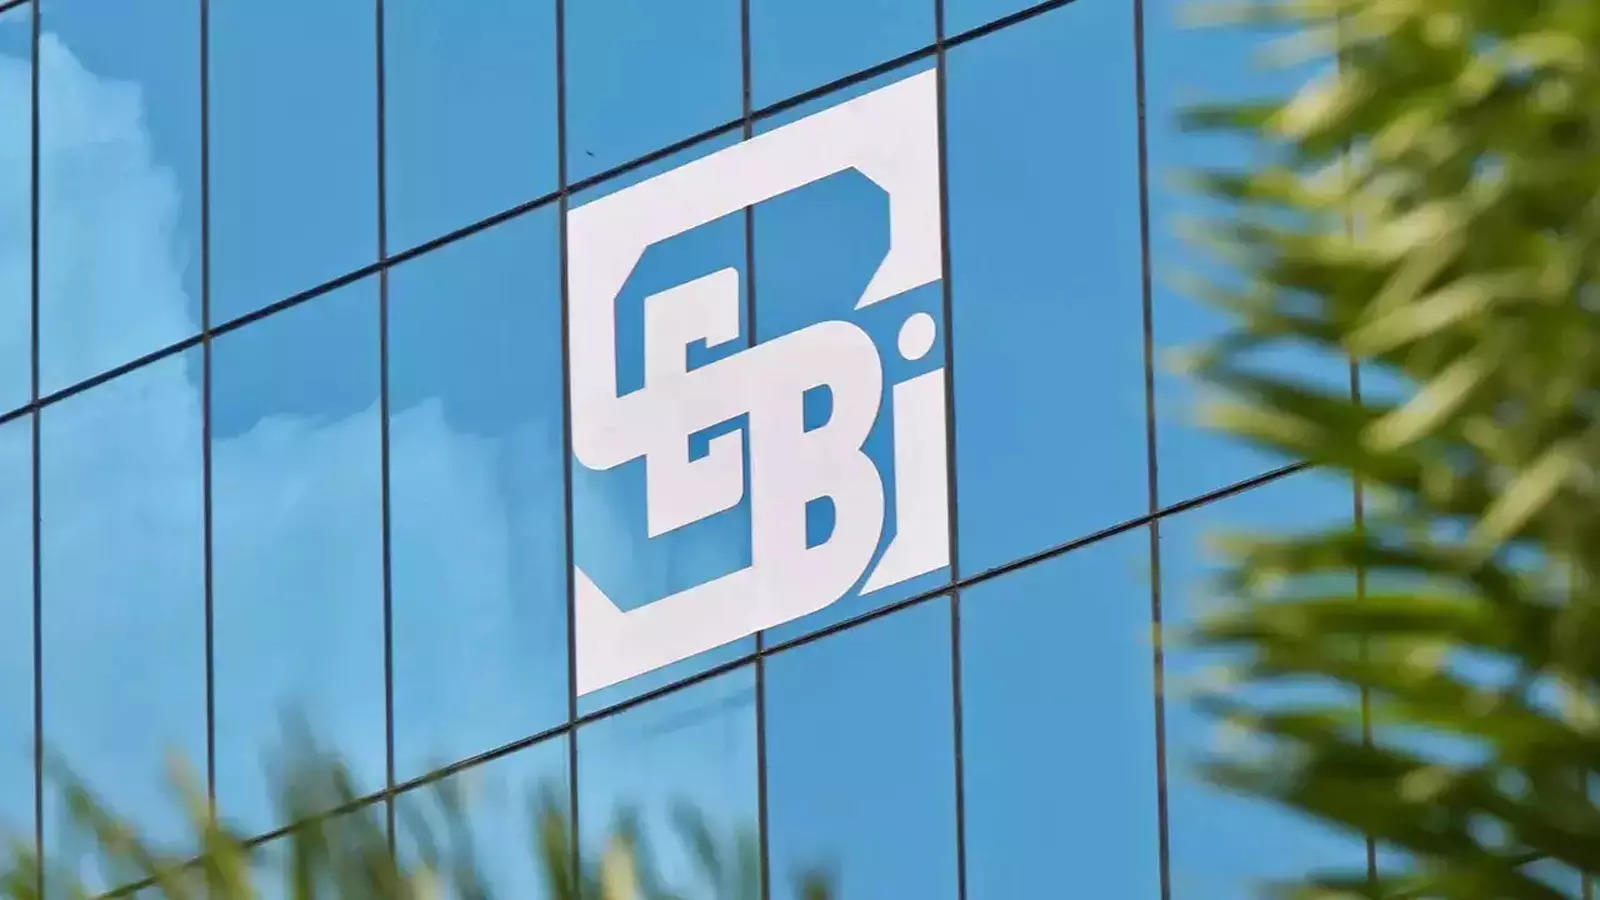 Charges levied by market institutions should be uniform, says Sebi 